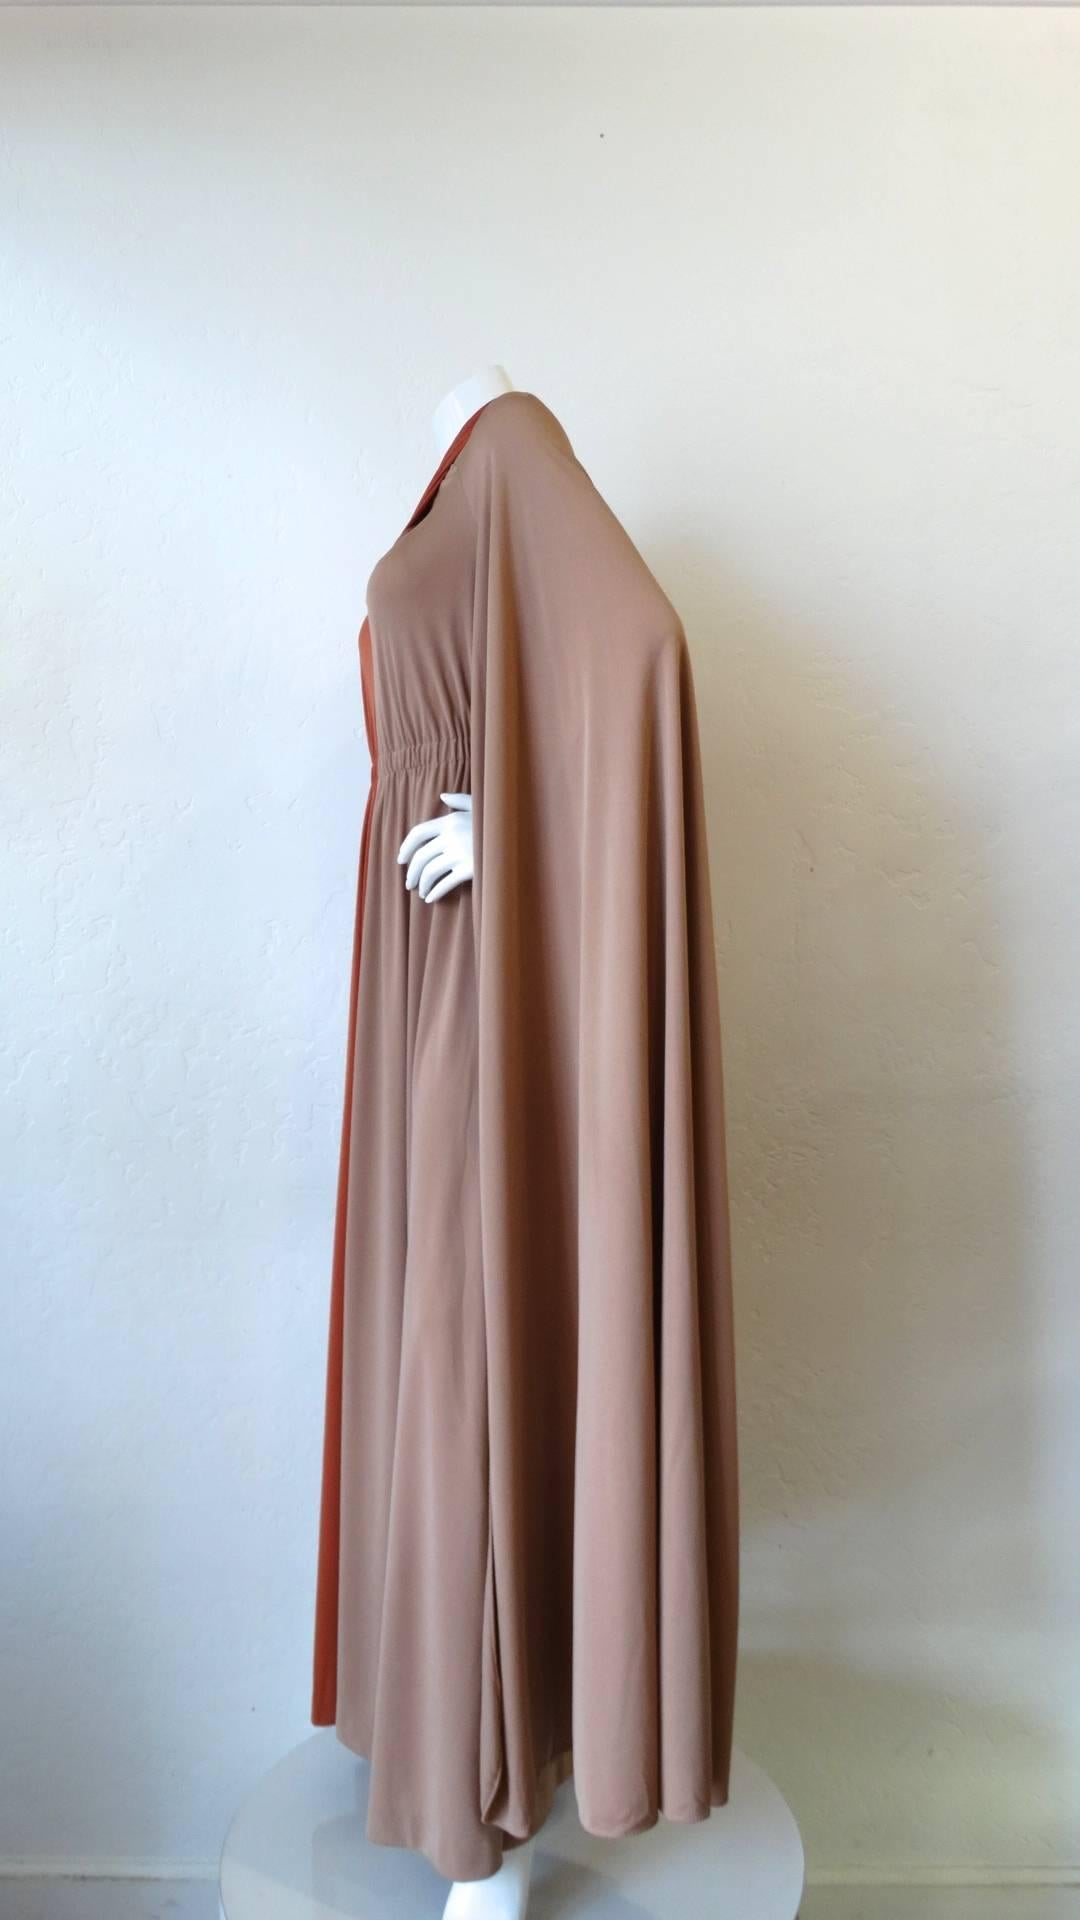 The Ultimate 1970s dramatic sleeved gown from California vintage label Miss Elliette! Made of a silky two toned fabric, one side of the dress a rich taupe color contrasted by brick orange on the opposite. Incredible extra long sleeves that nearly